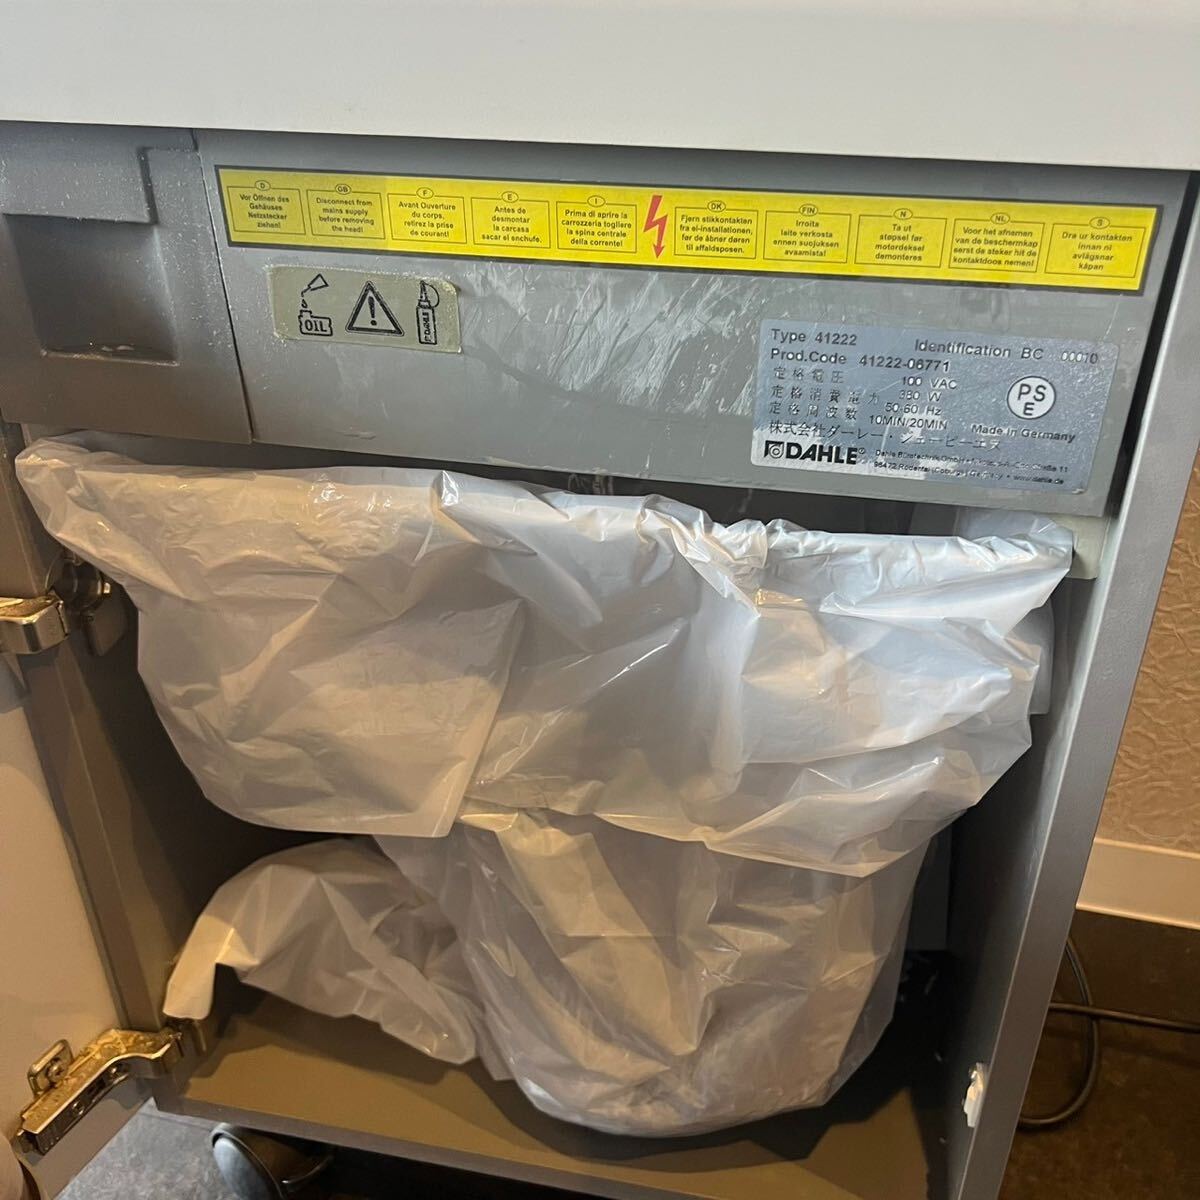 DAHLE clean Tec shredder 41222 micro Cross cut personal information business use office work supplies security Manufacturers price ¥198,000-